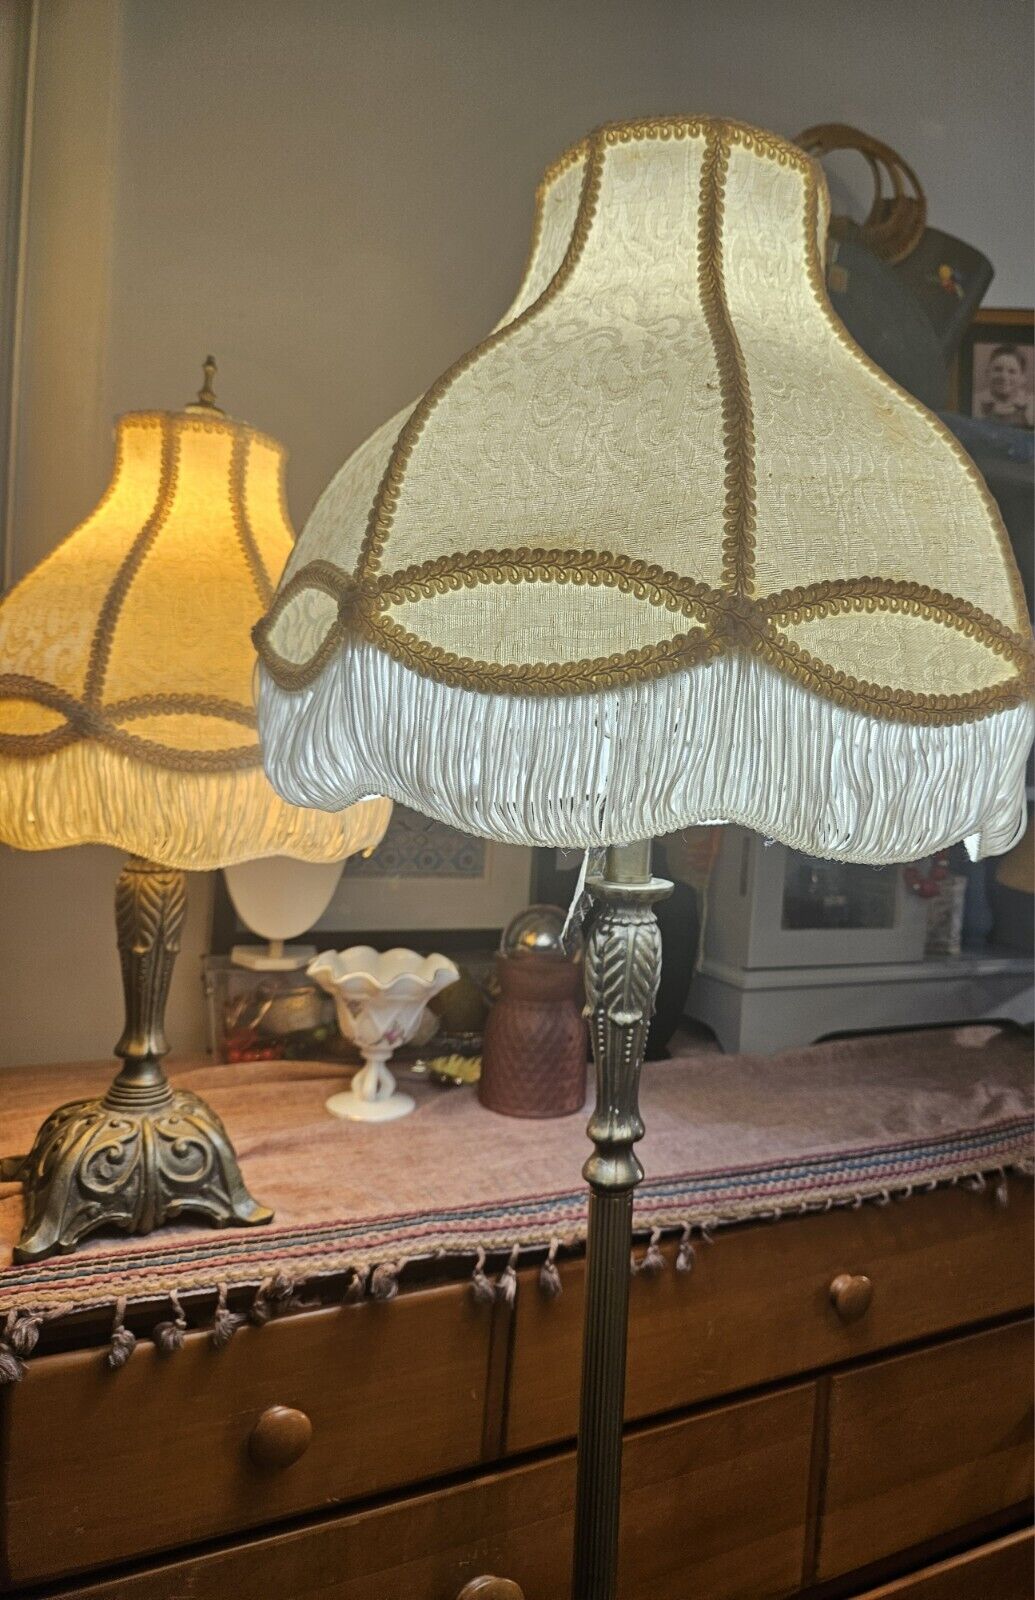 Pair Of Cheyenne Vintage Lamps With Original Domed Fringe Shades